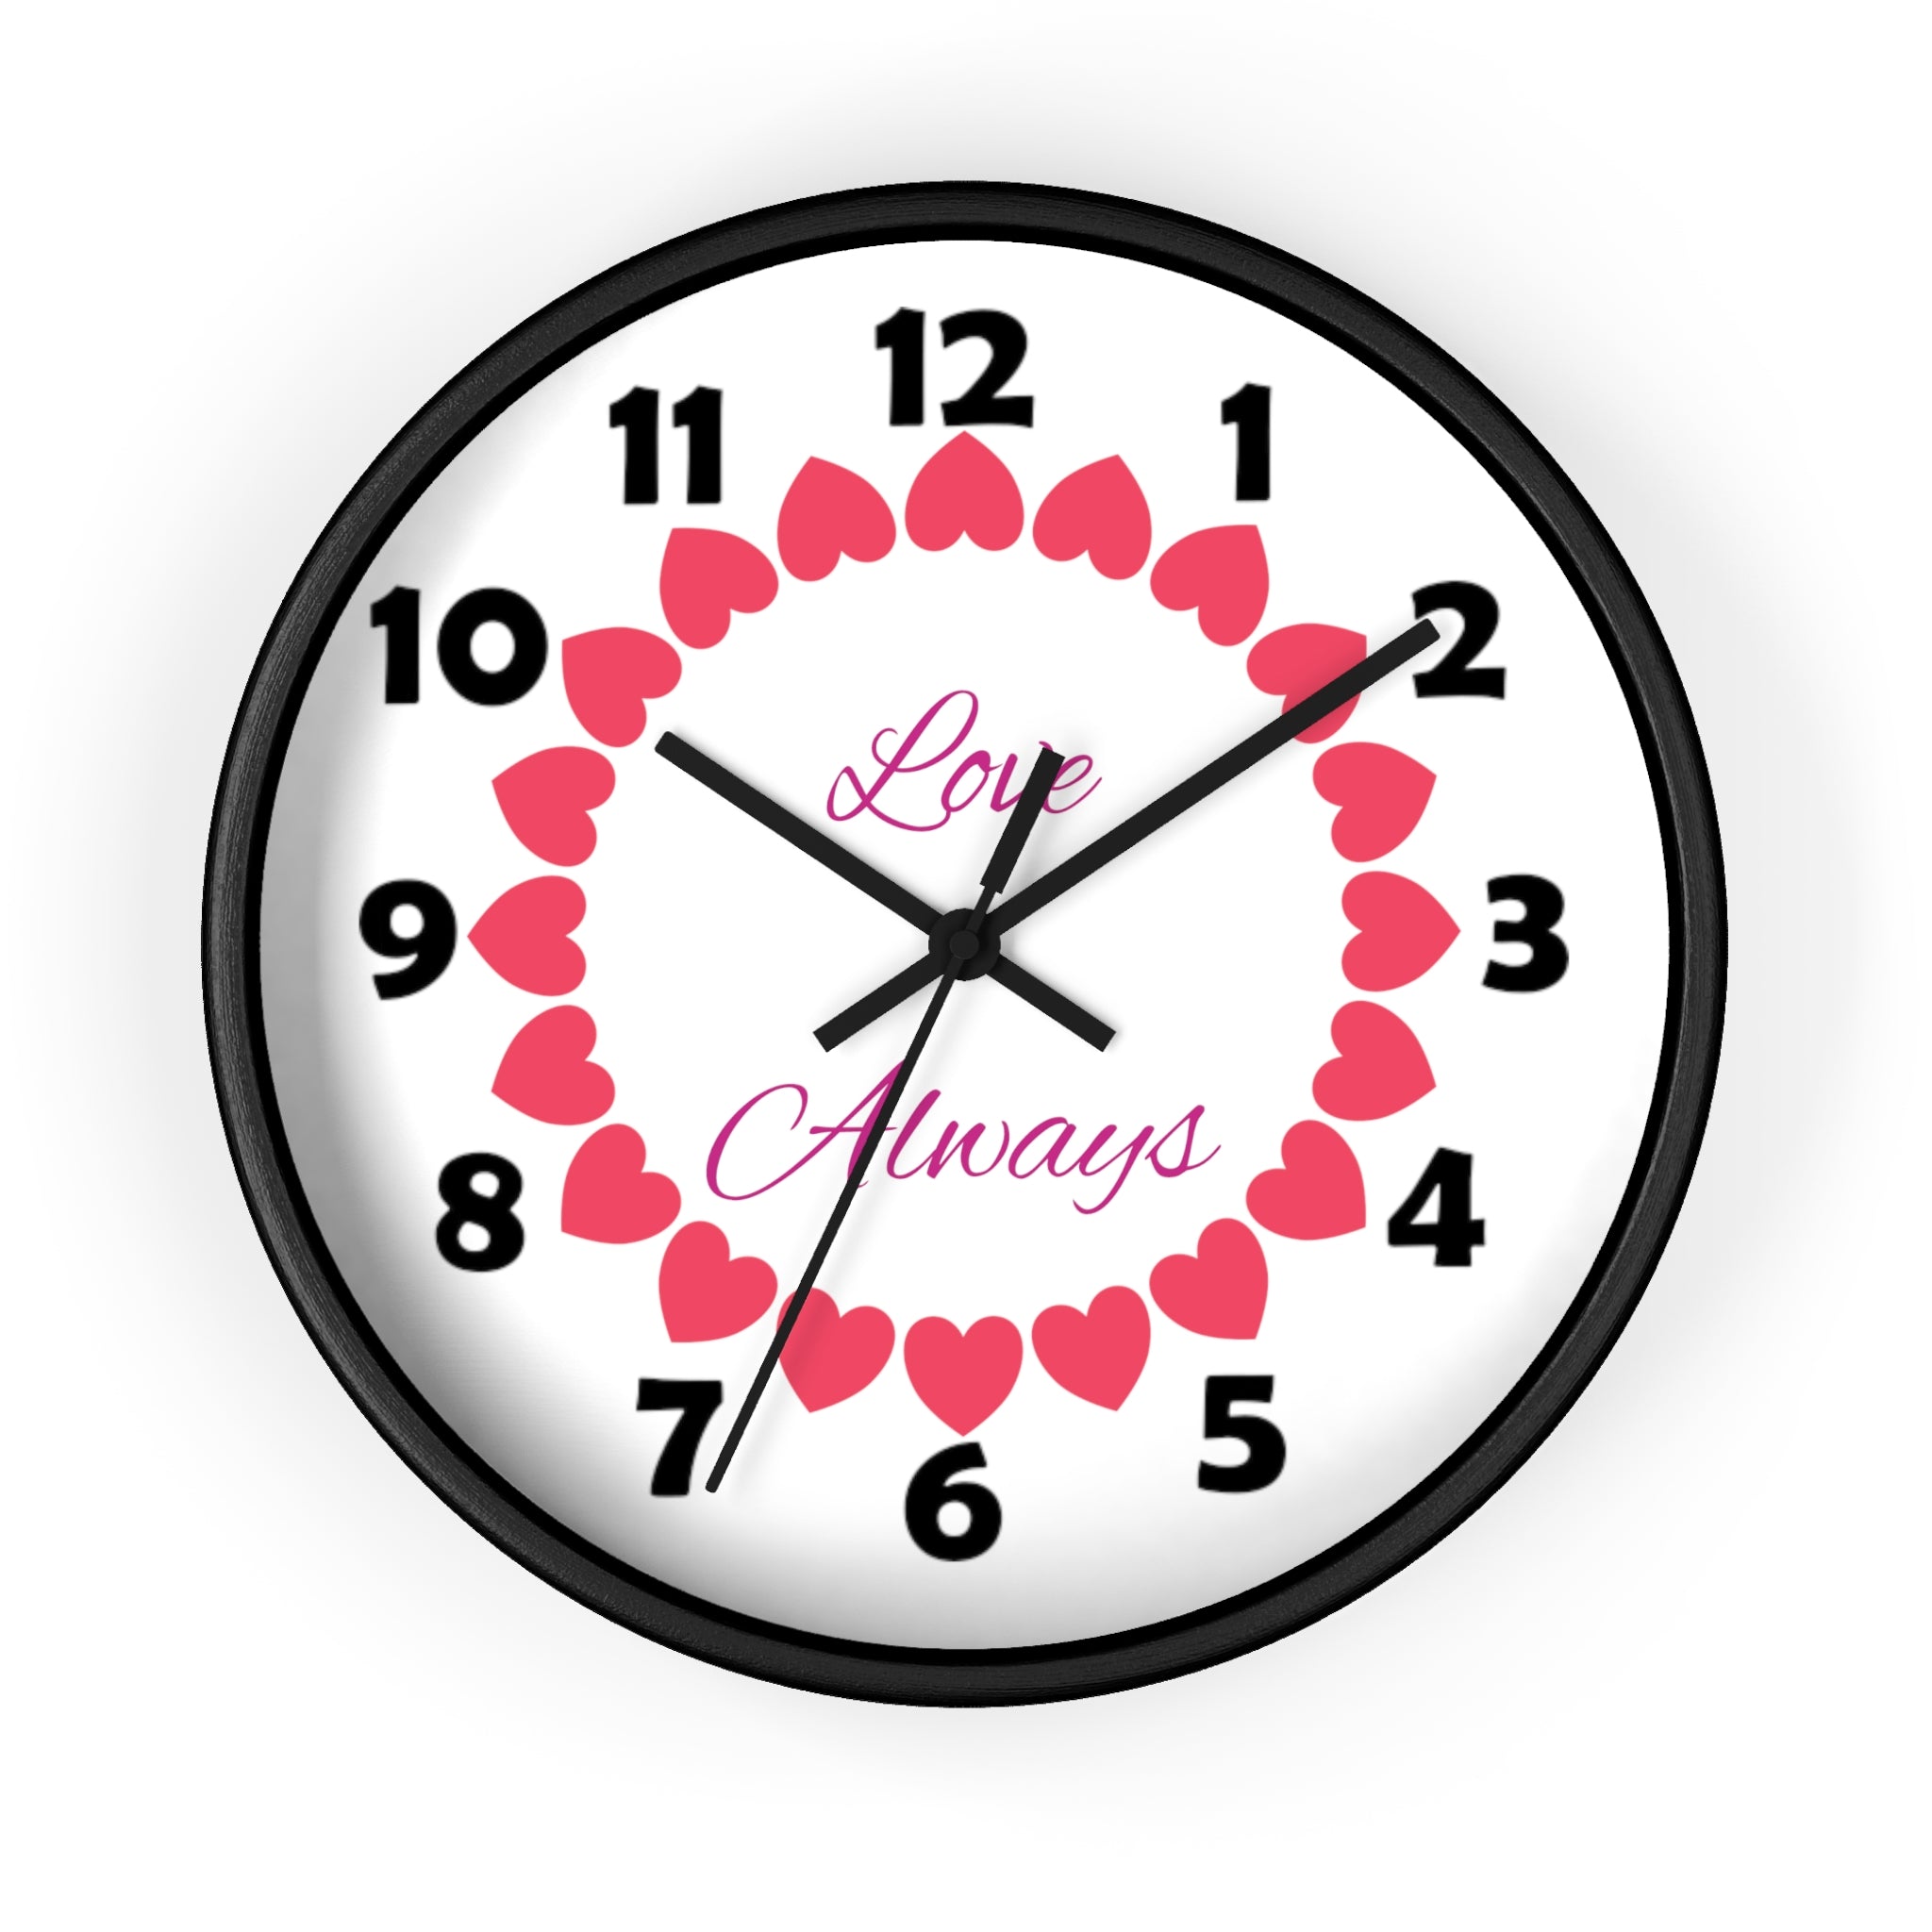 10 inch round wall clock with a ring of hearts and the message Love Always